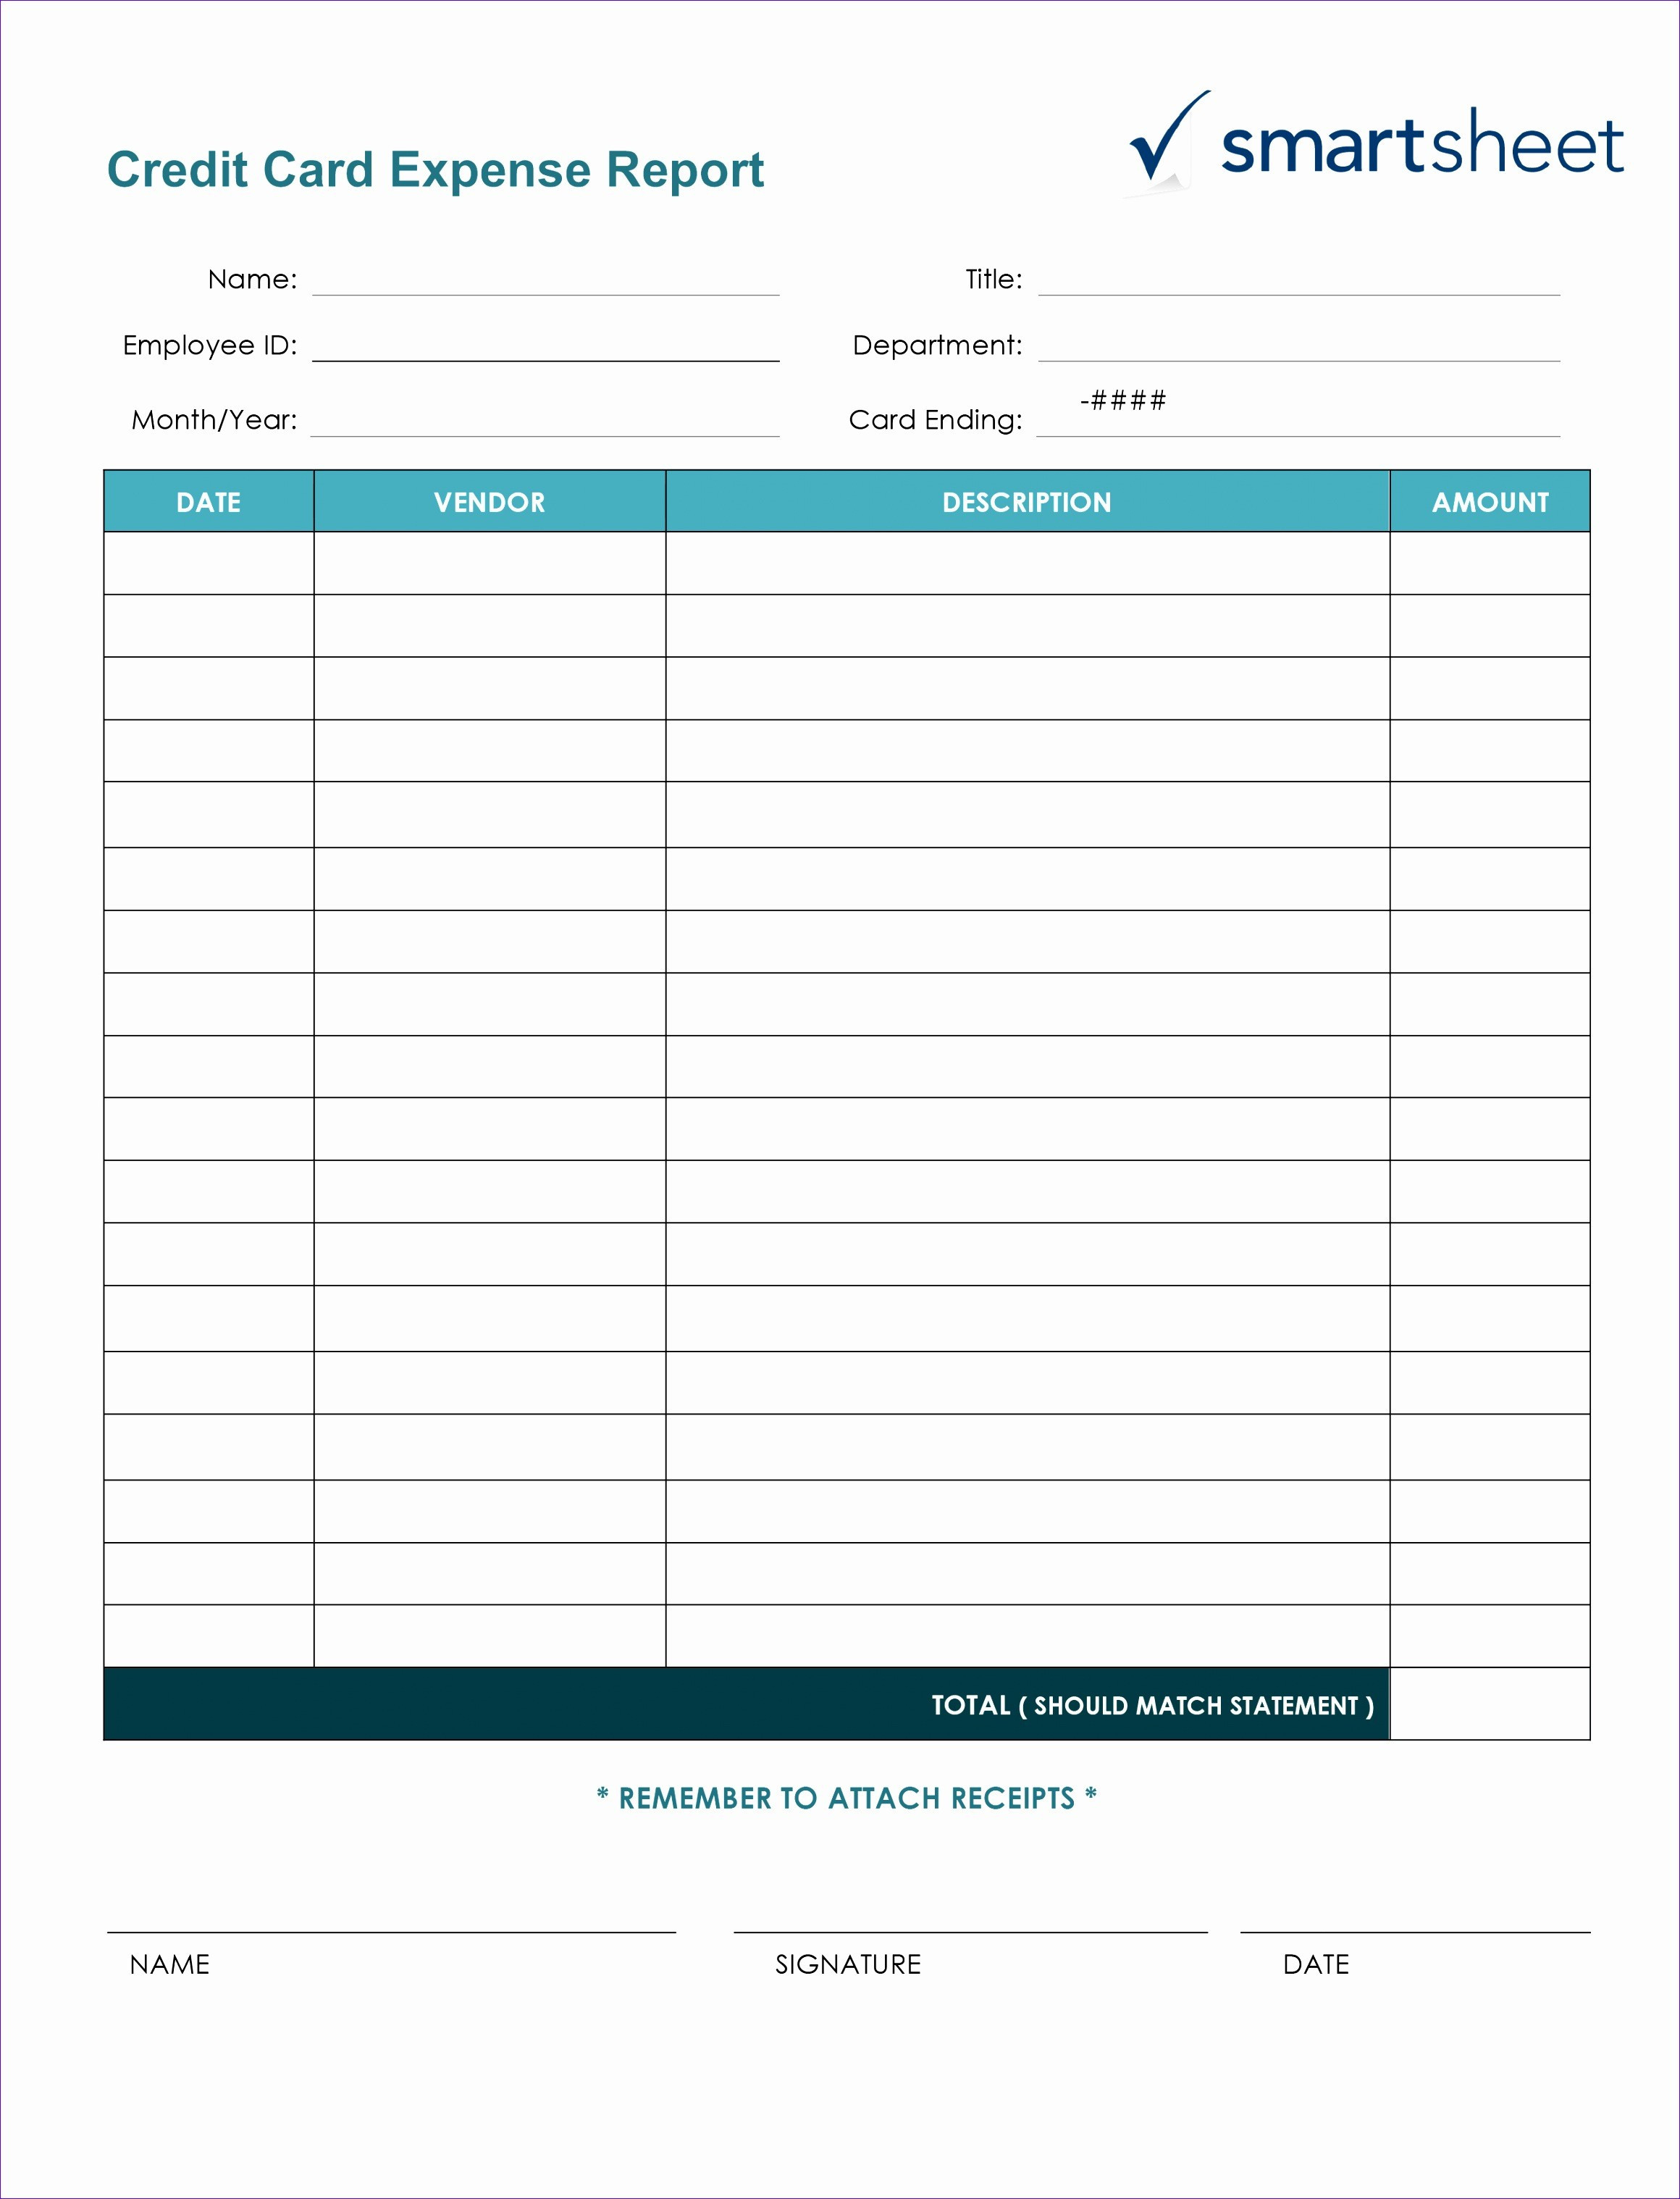 Reconciliation Excel Spreadsheet intended for Balance Sheet Template